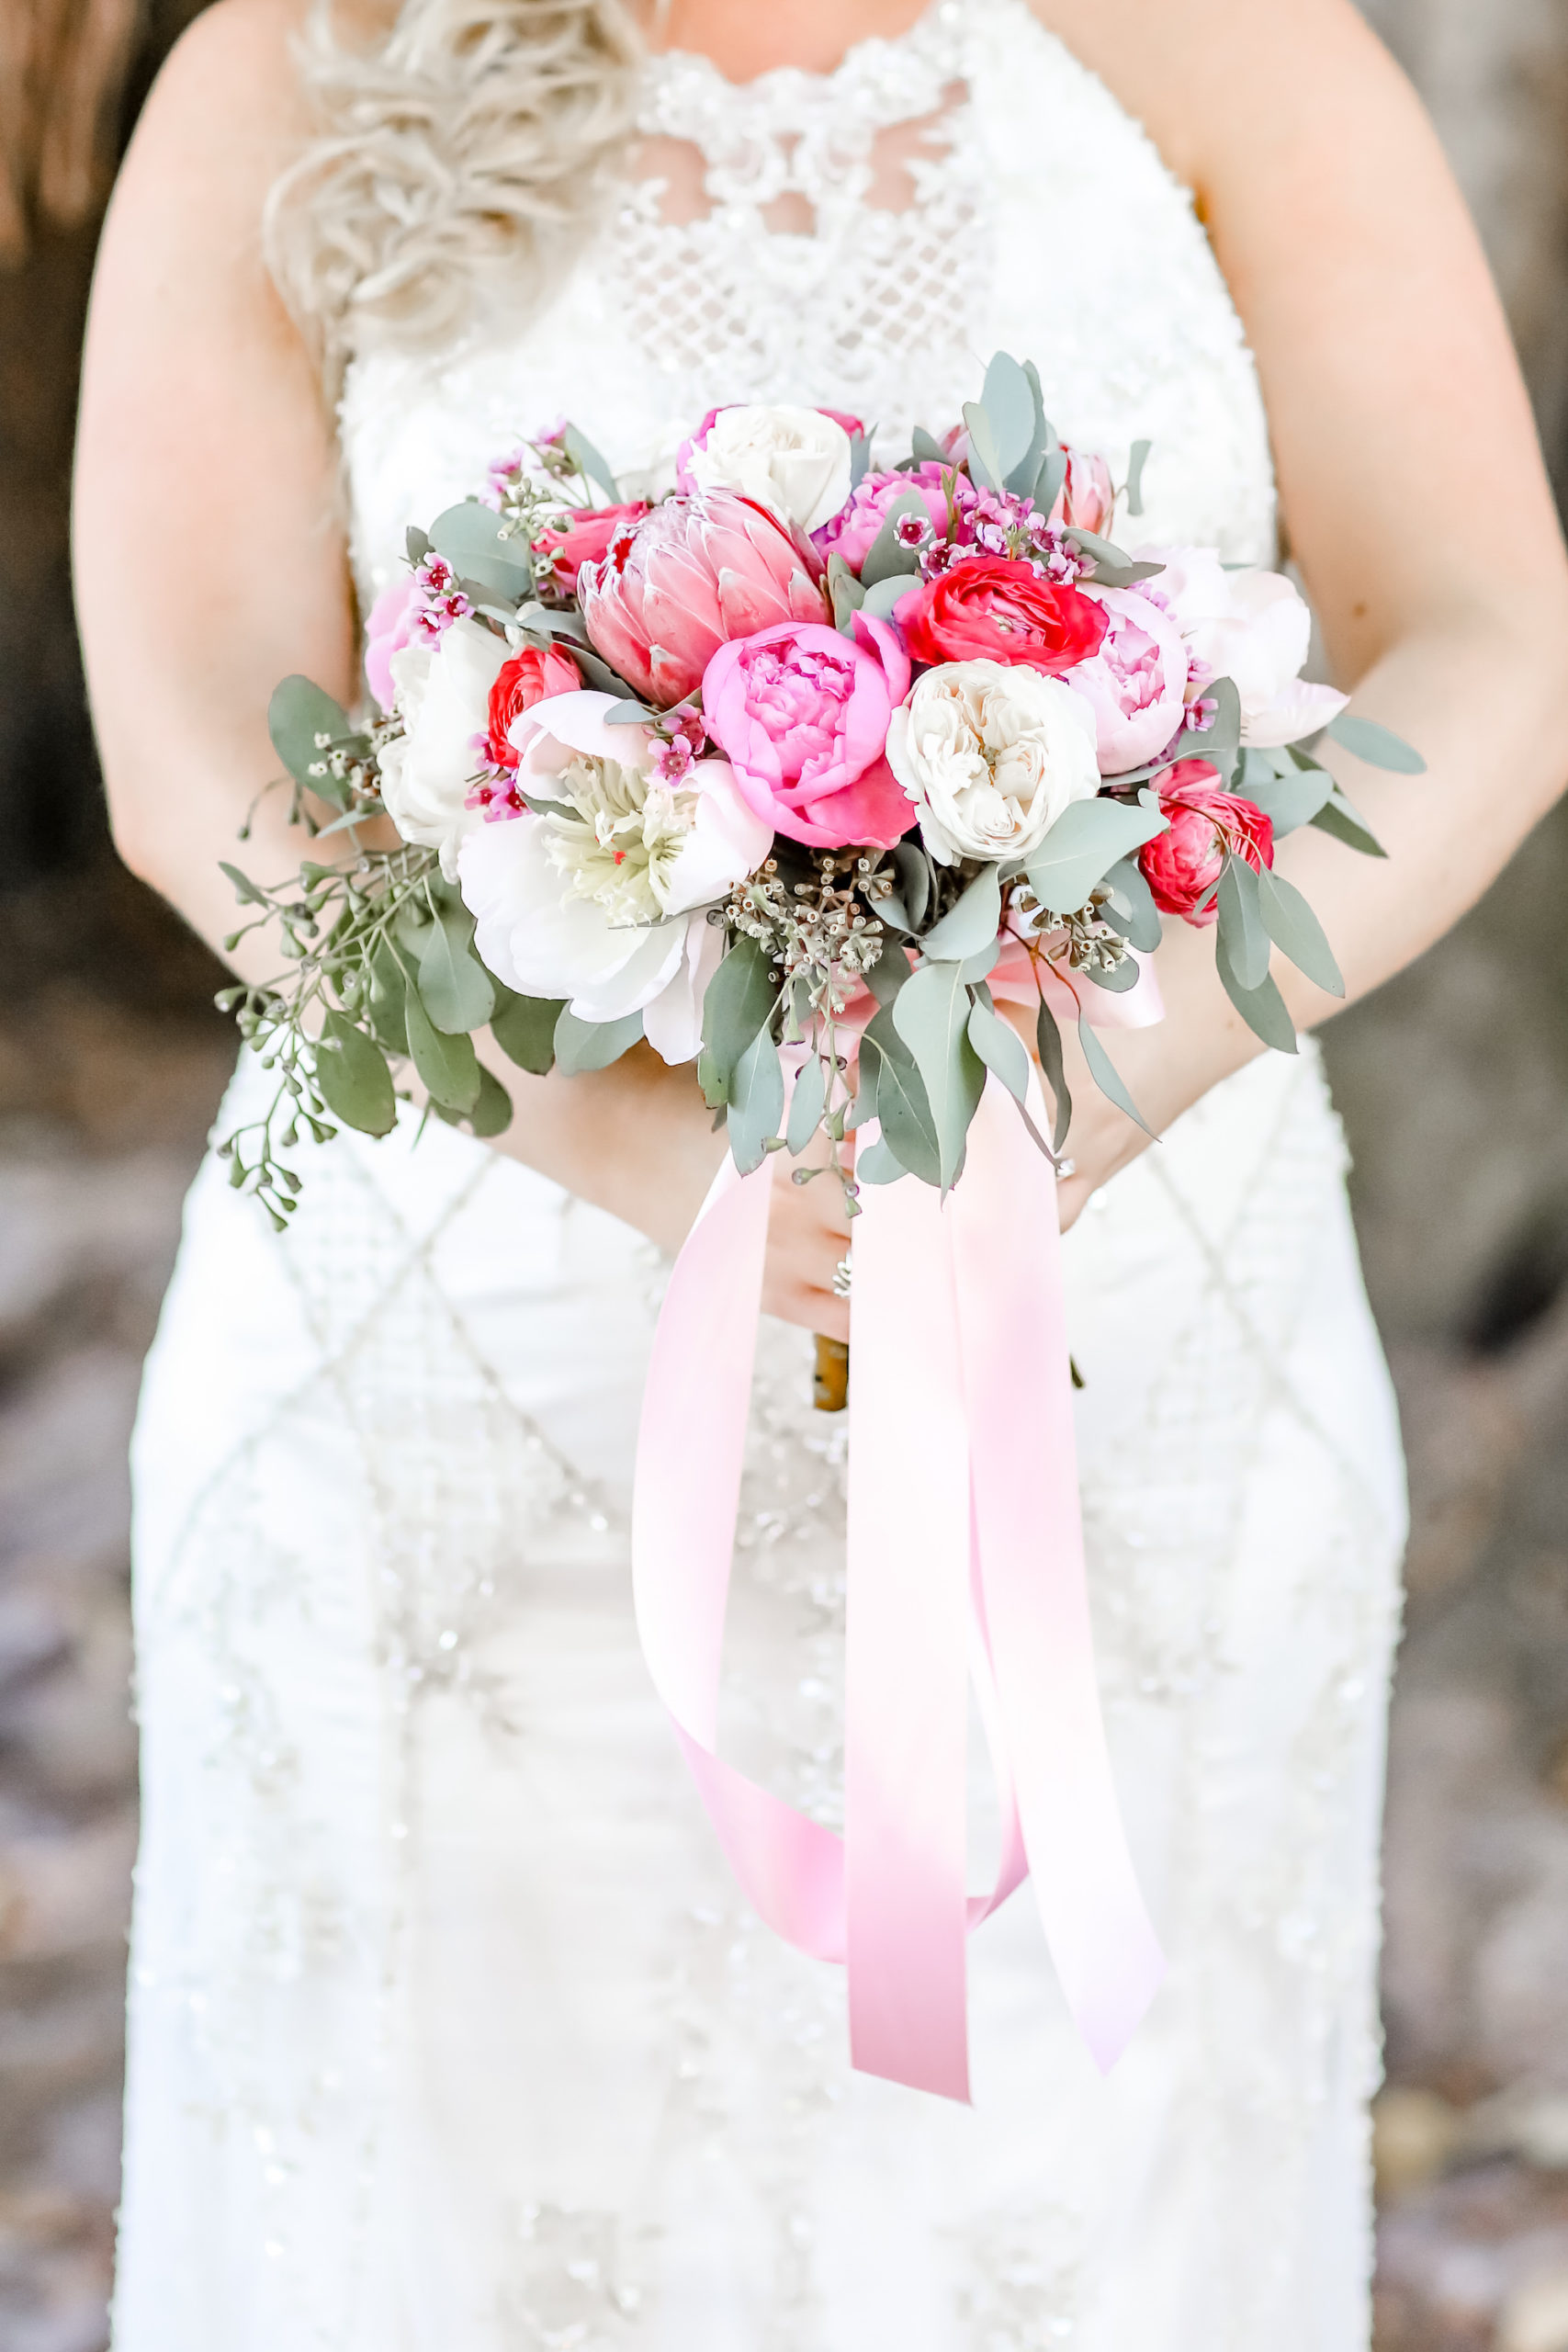 Florida Bride holding Elegant Bridal Bouquet, Ivory, White, Pink and Red Florals, Dusty Rose Accent Ribbon with Greenery | Florida Wedding Photographer Lifelong Photography Studios